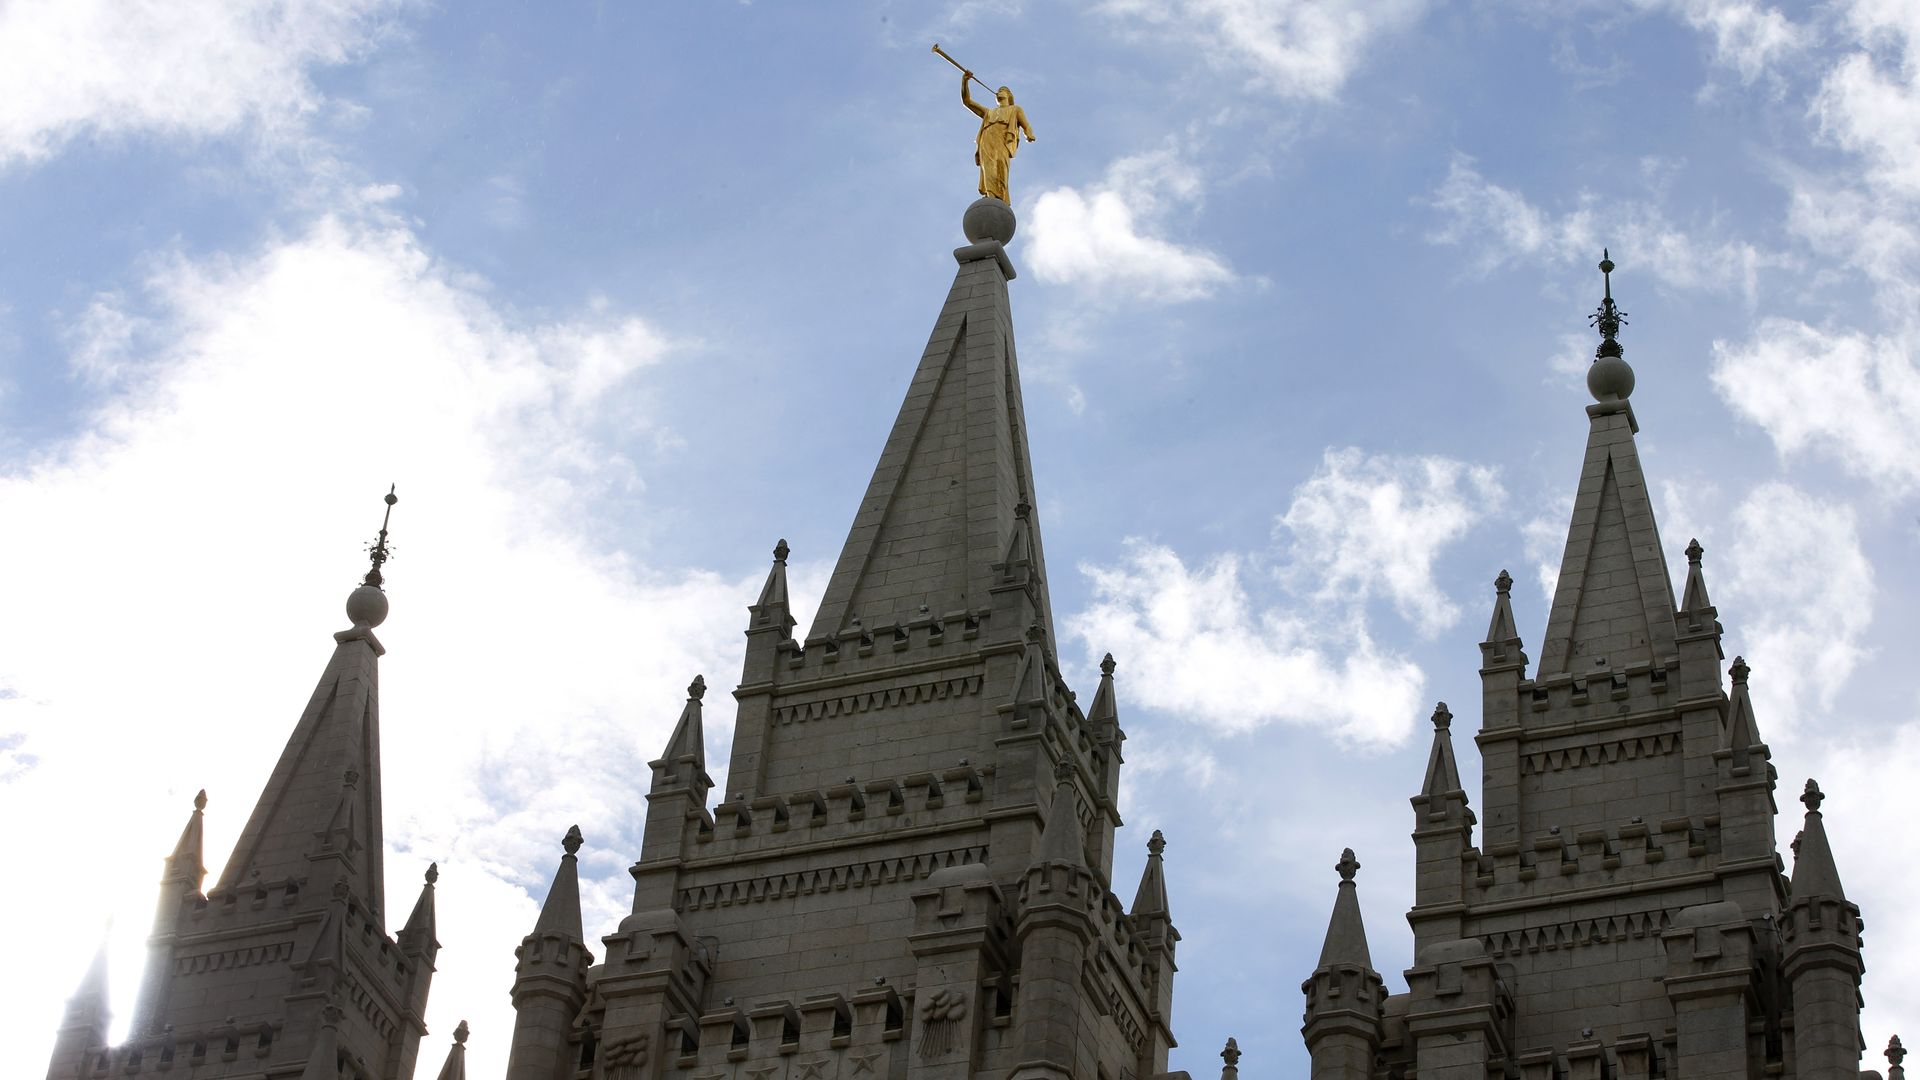 The steeples of the temple of the Church of Jesus Christ of Latter-day Saints are backed by a blue sky with clouds.